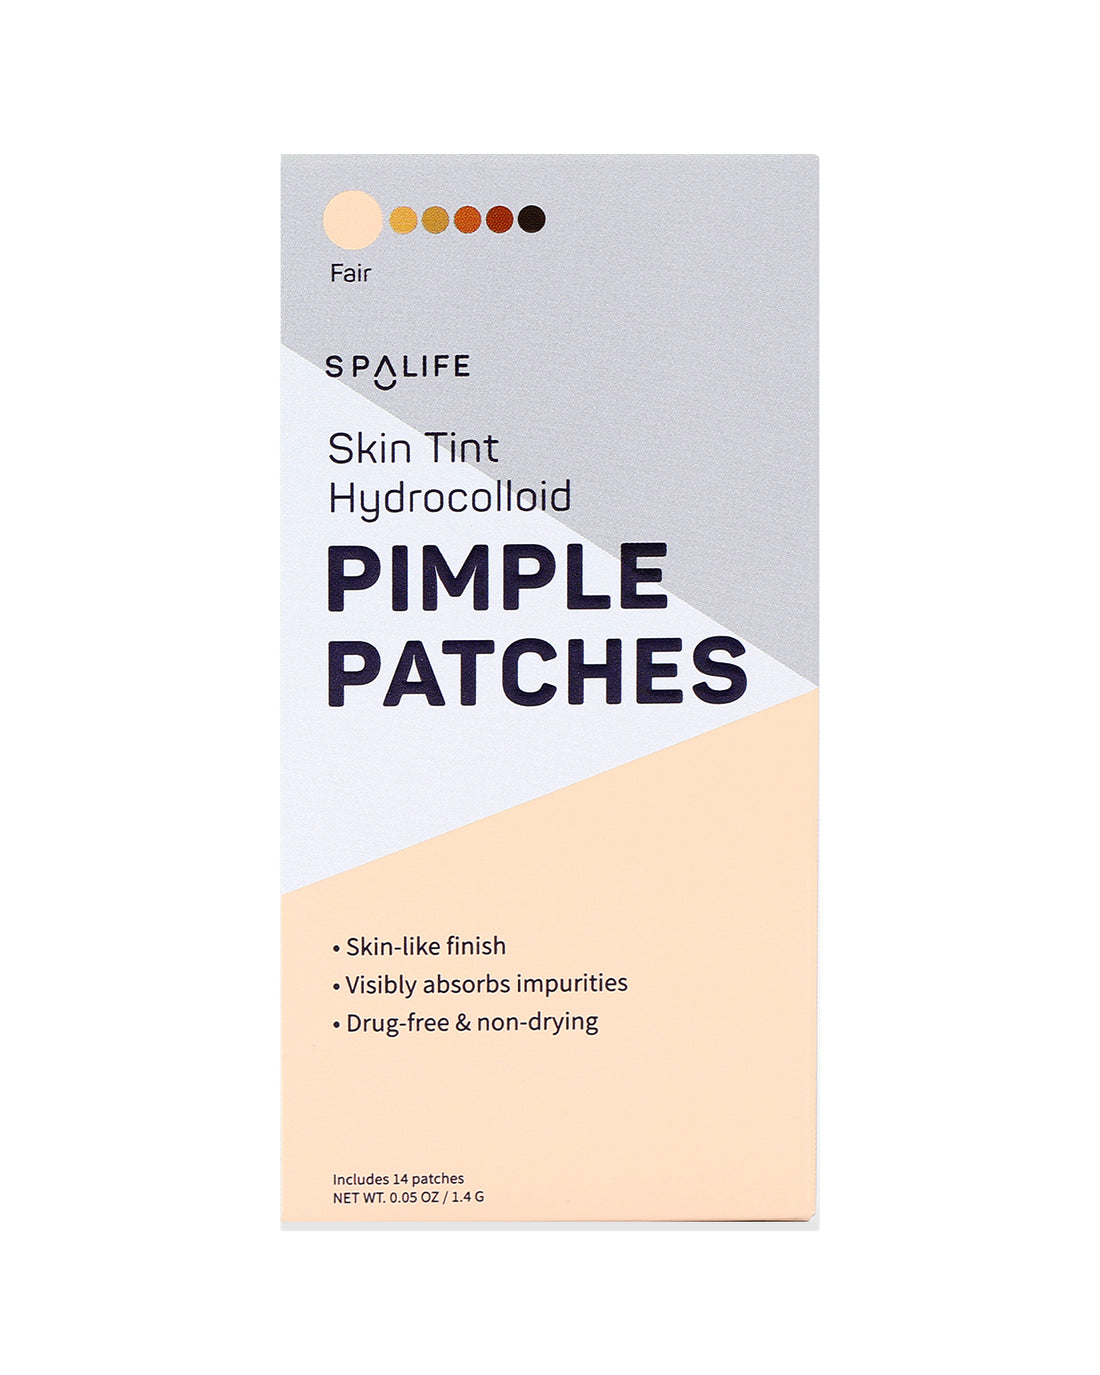 Skin_tint_pimple_patches_packe-723